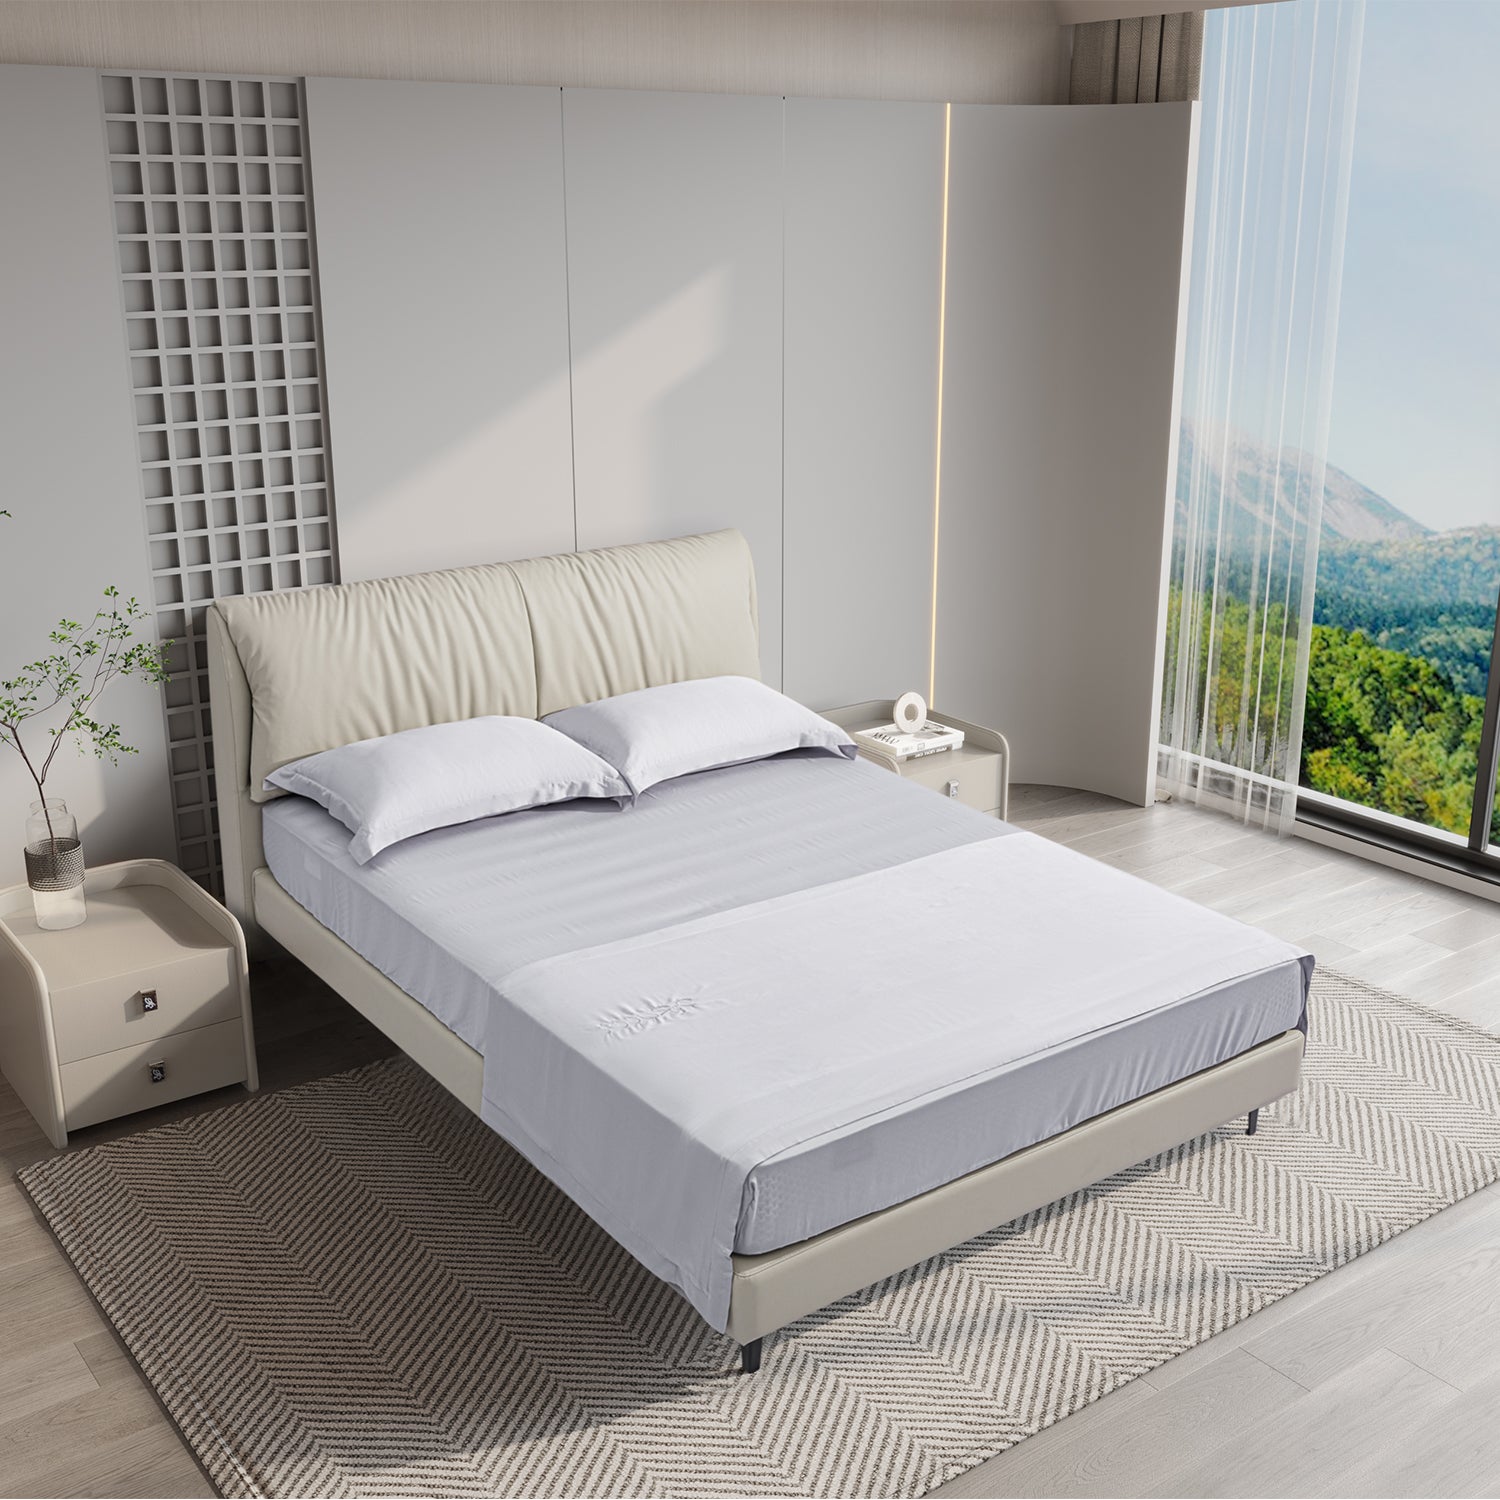 Modern bedroom featuring DeRUCCI Bed Frame BOC1 - 012 with white leather, minimalist decor, and scenic window view.